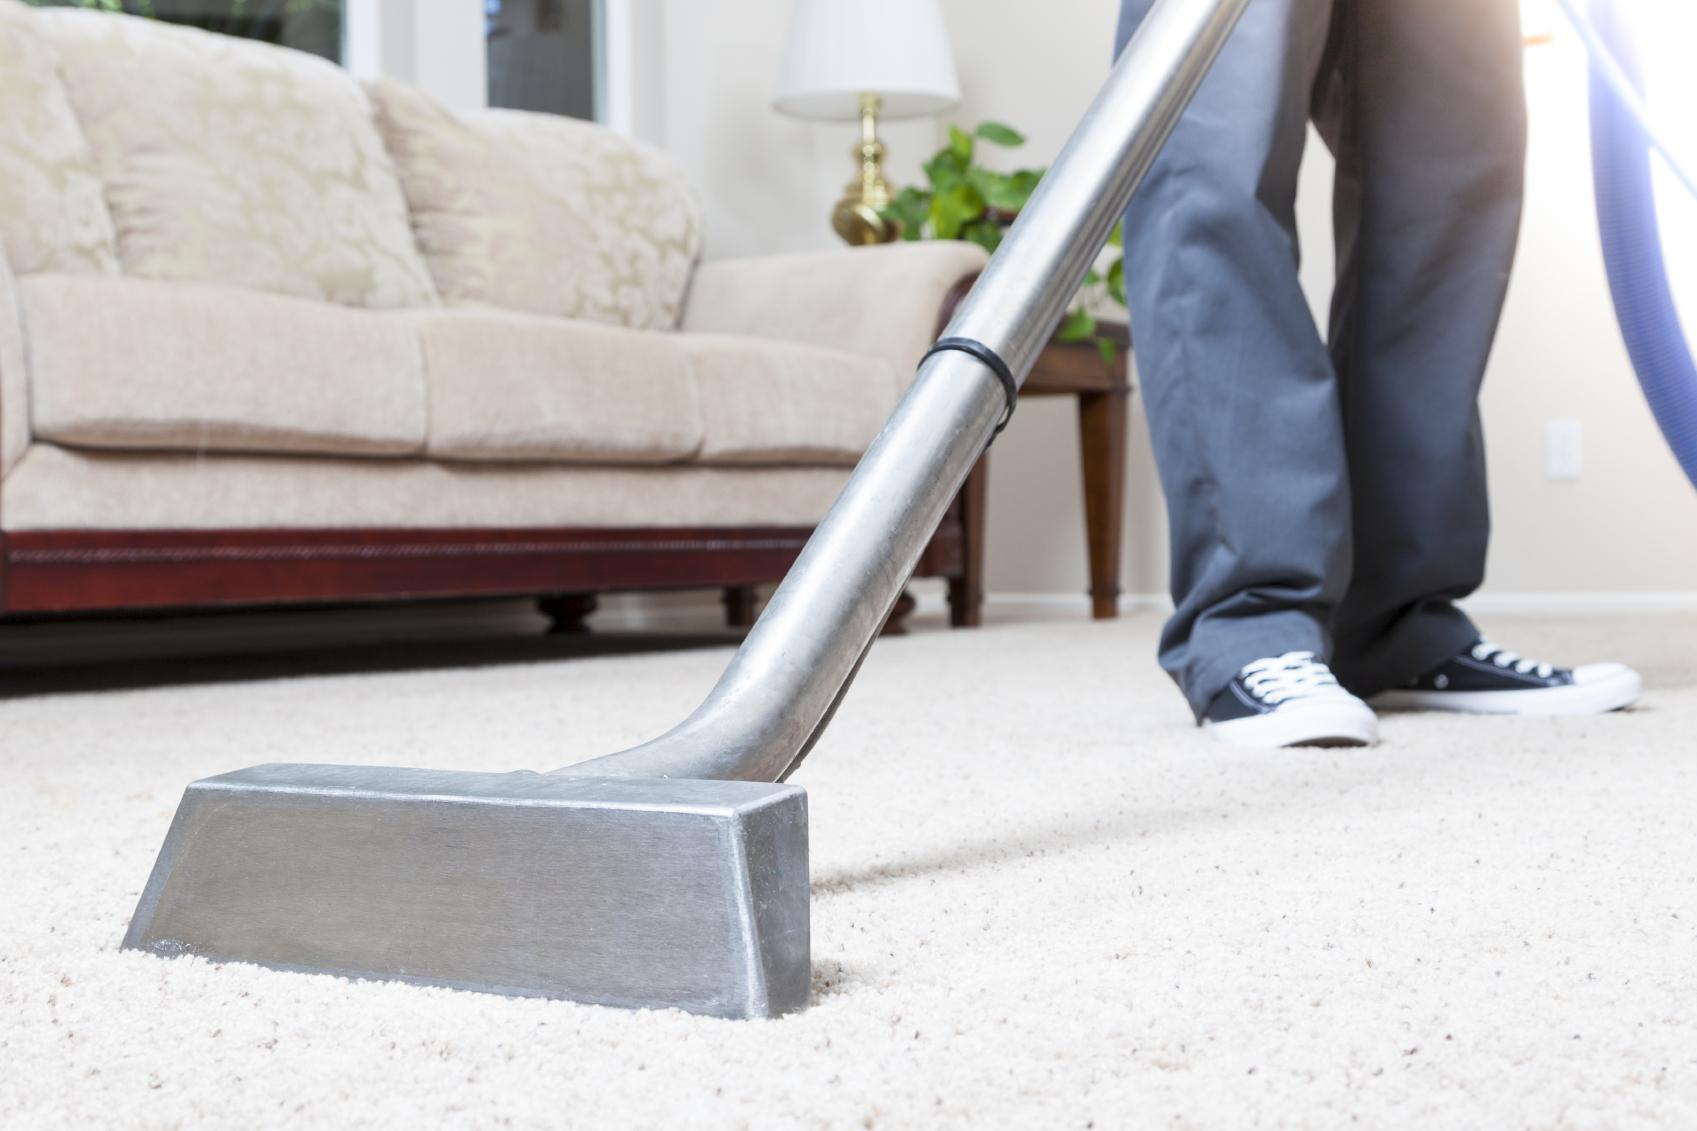 How to pick a carpet cleaning company